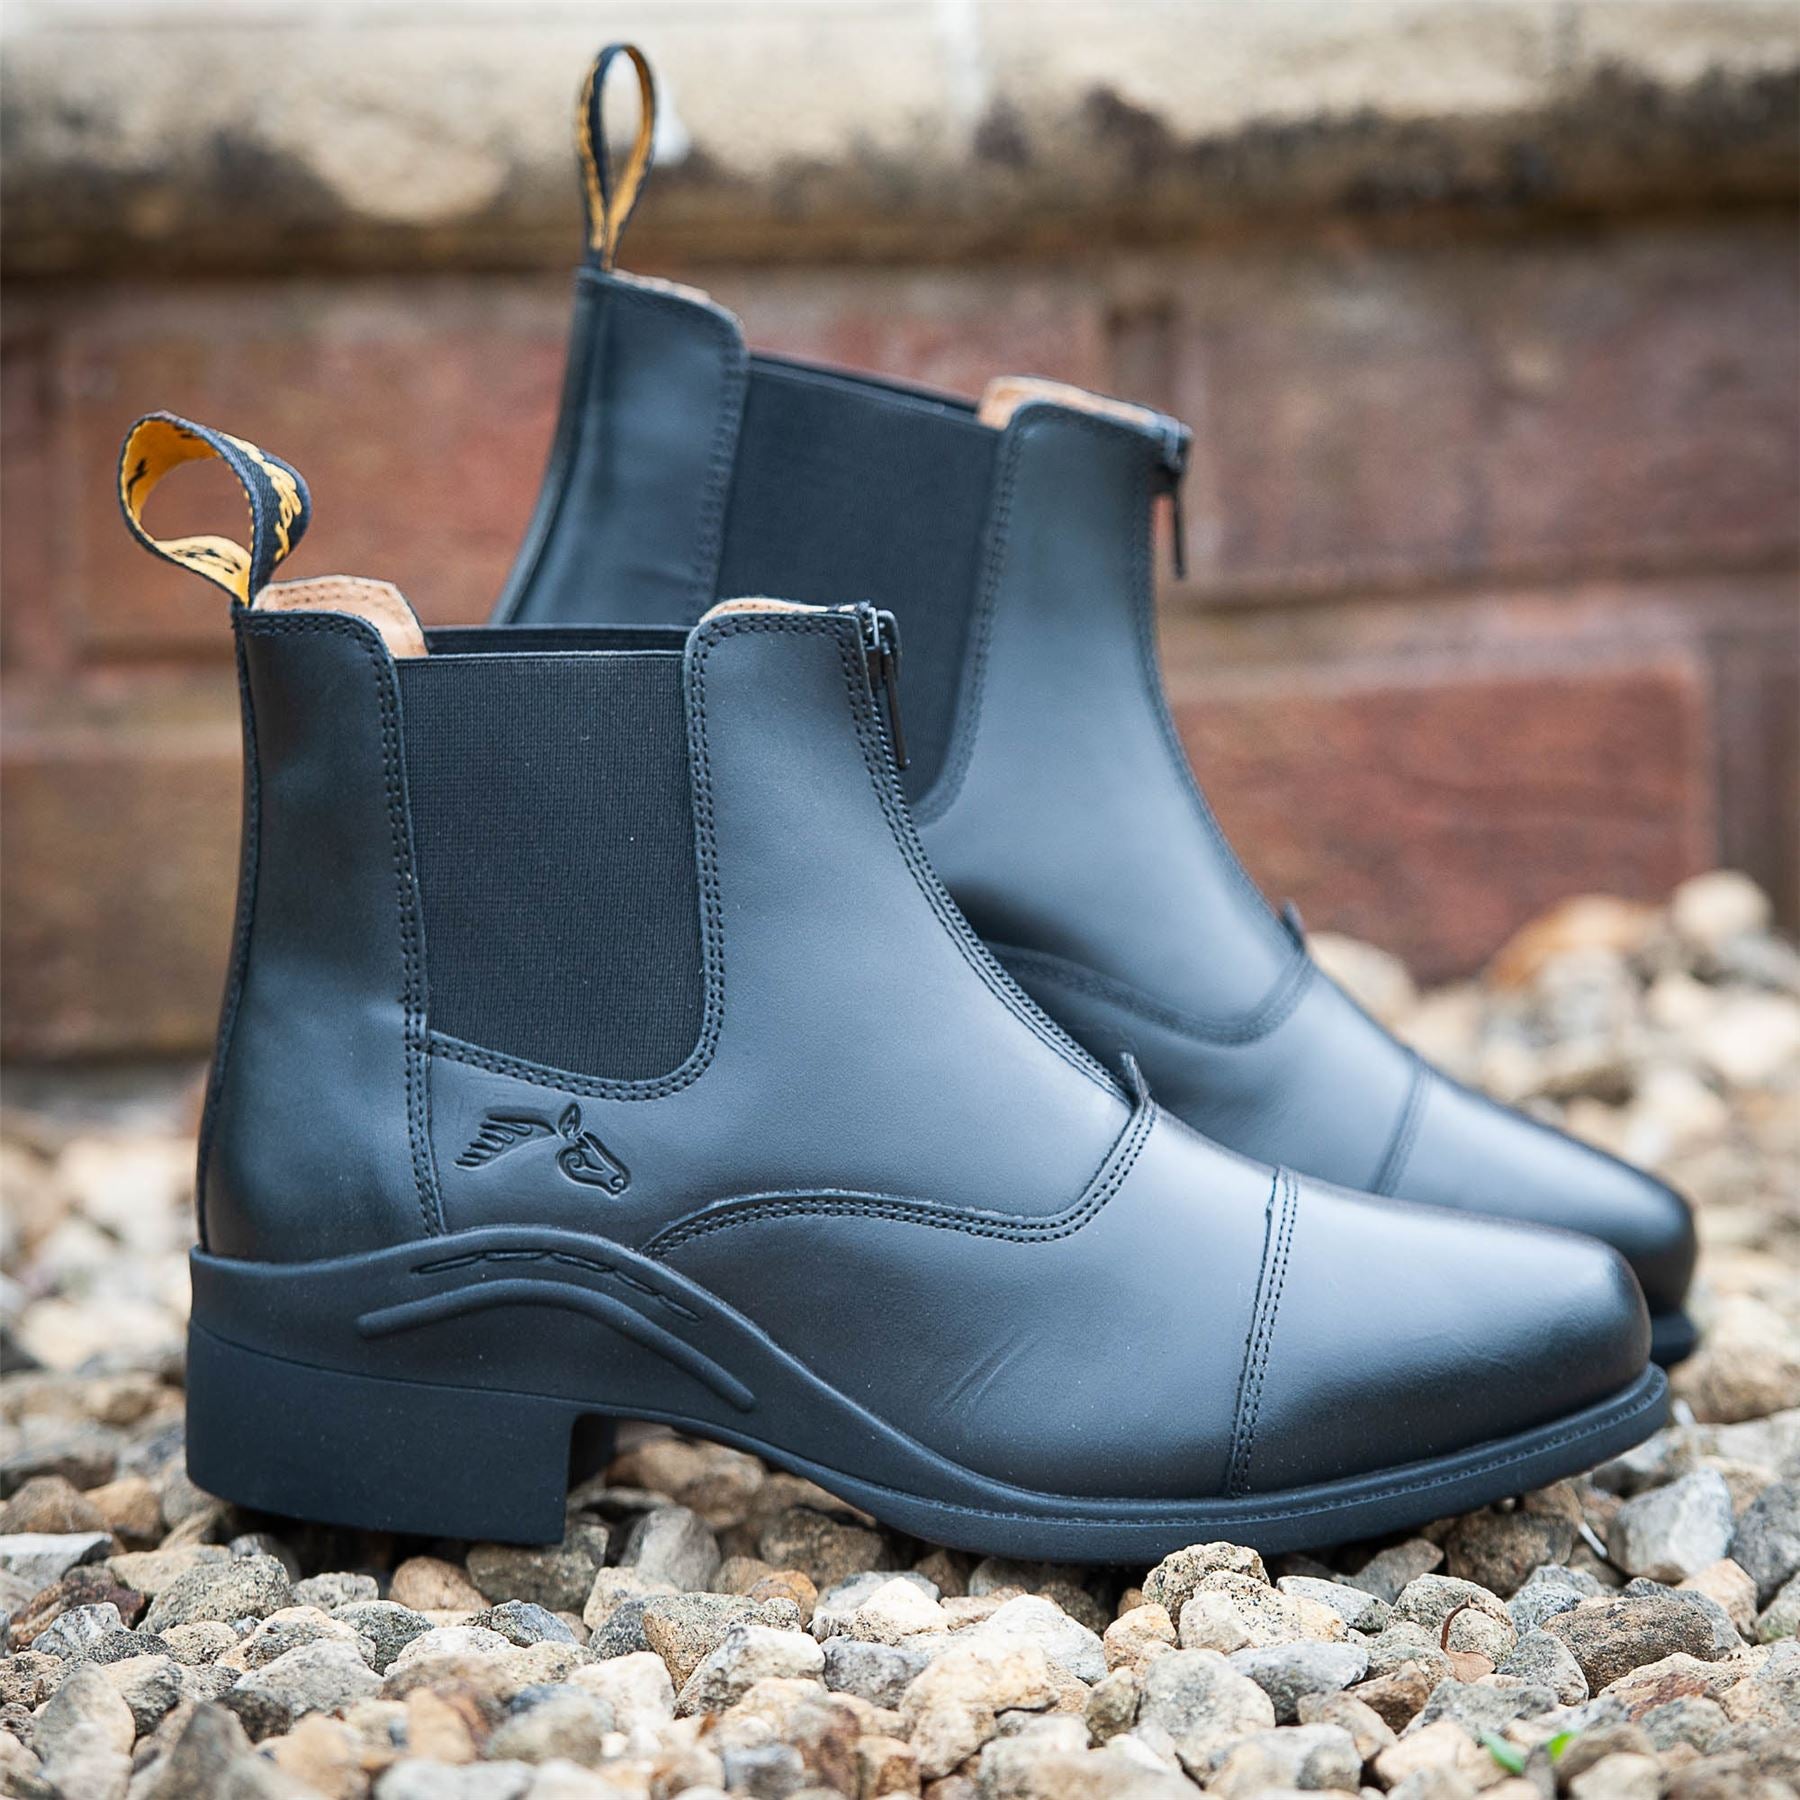 Gallop Equestrian Elegance Leather Paddock Zip Boots - Just Horse Riders